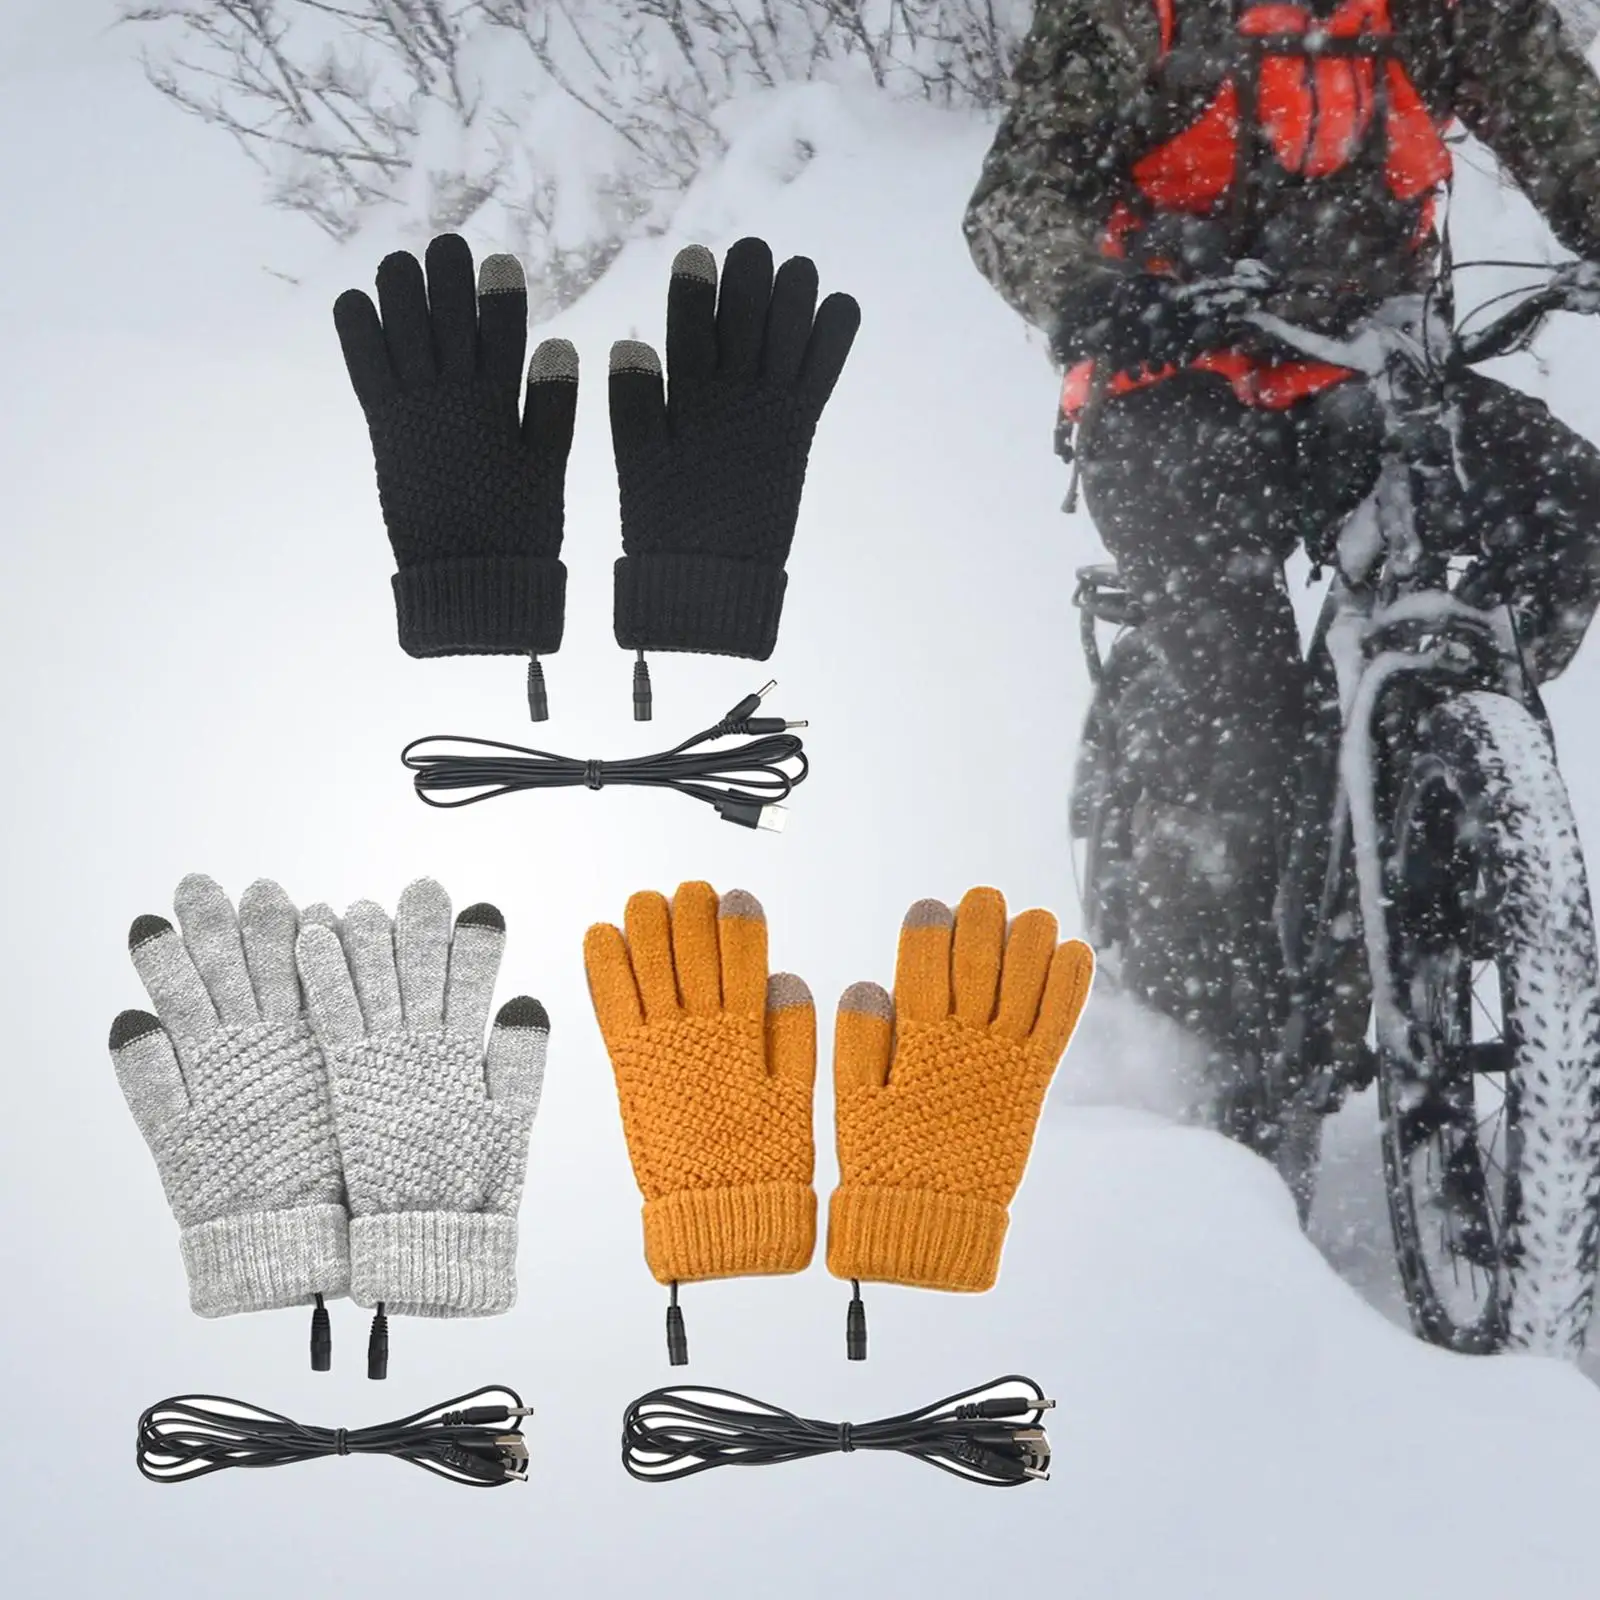 USB Heated Gloves Connected to Laptop Adapter for Power Hands Warmer Heating Mittens for Cycling Camping Typing Outdoor Skiing